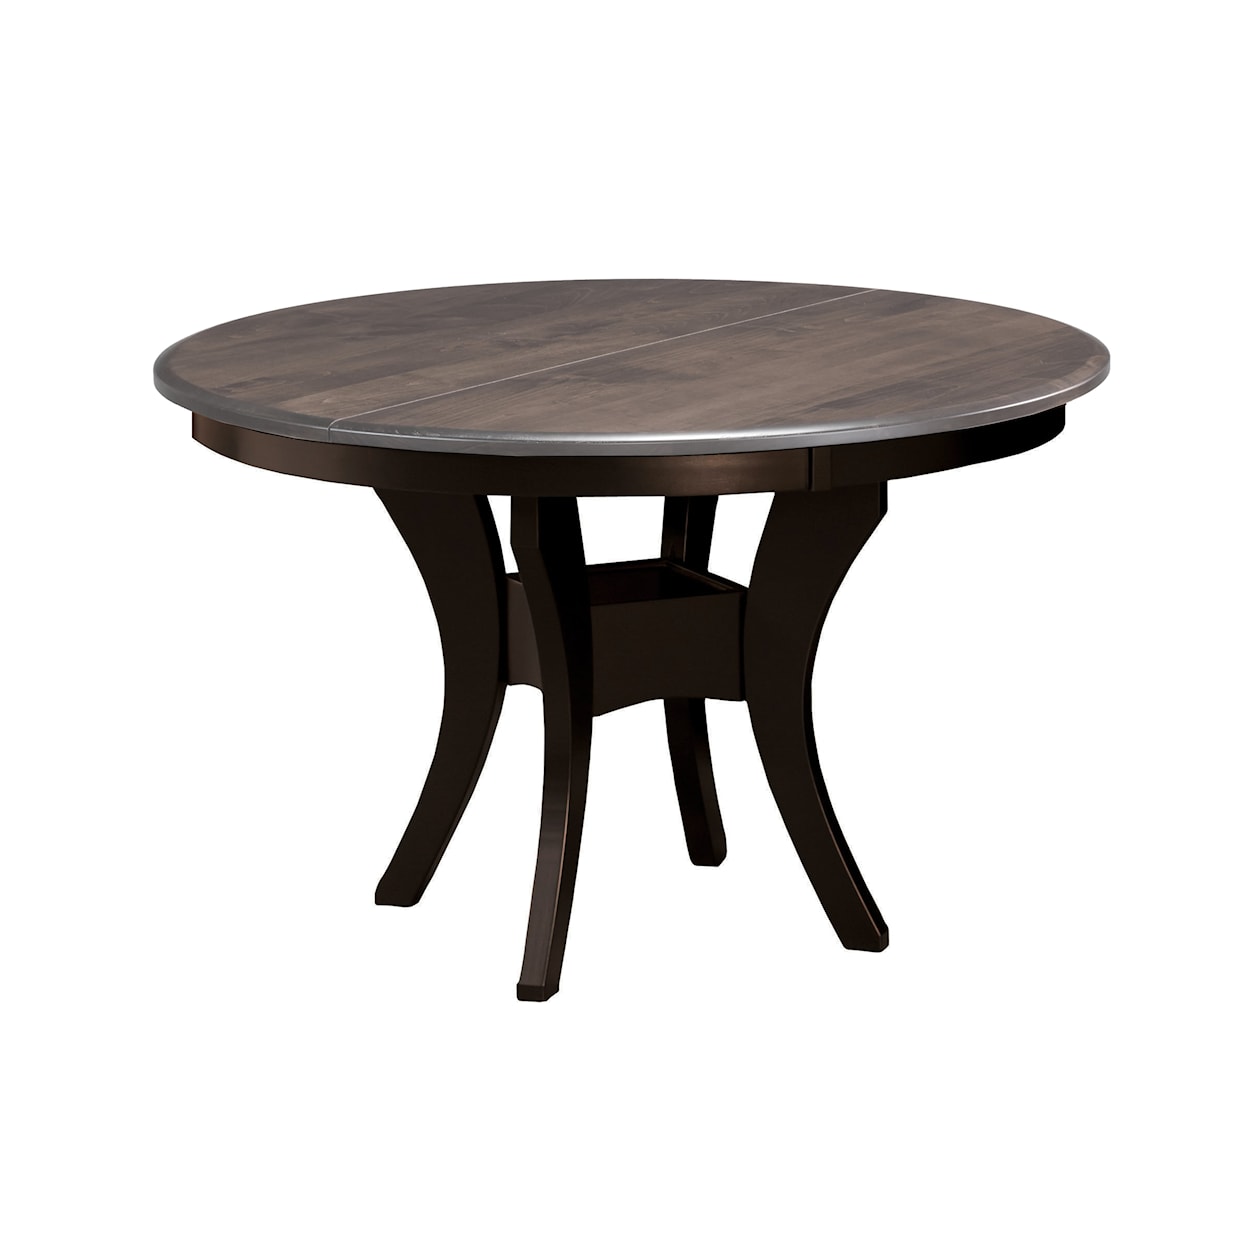 Archbold Furniture Amish Essentials Casual Dining Sarah 48" Round Dining Table